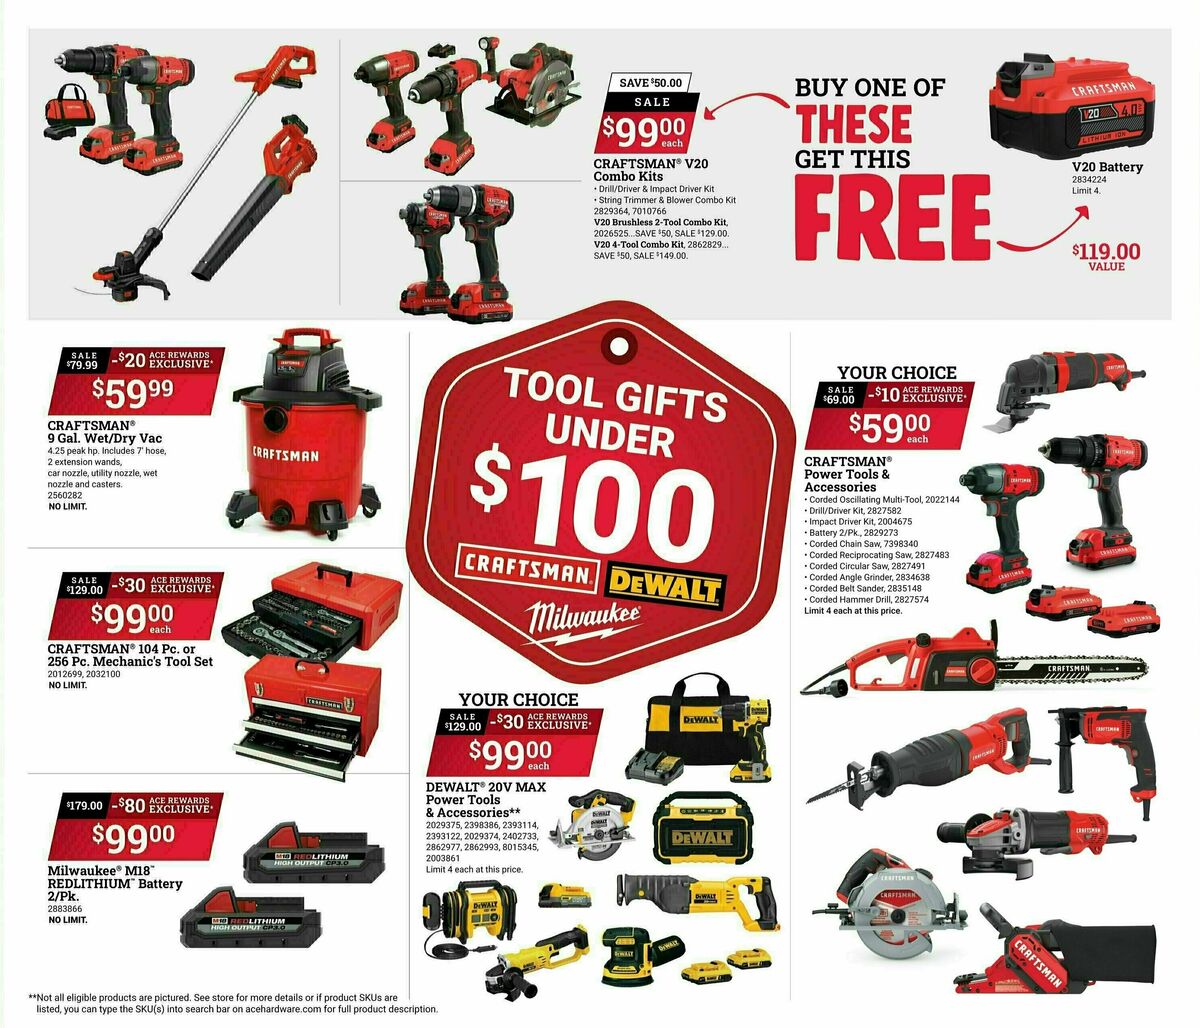 Ace Hardware Gift Guide Weekly Ad from December 1